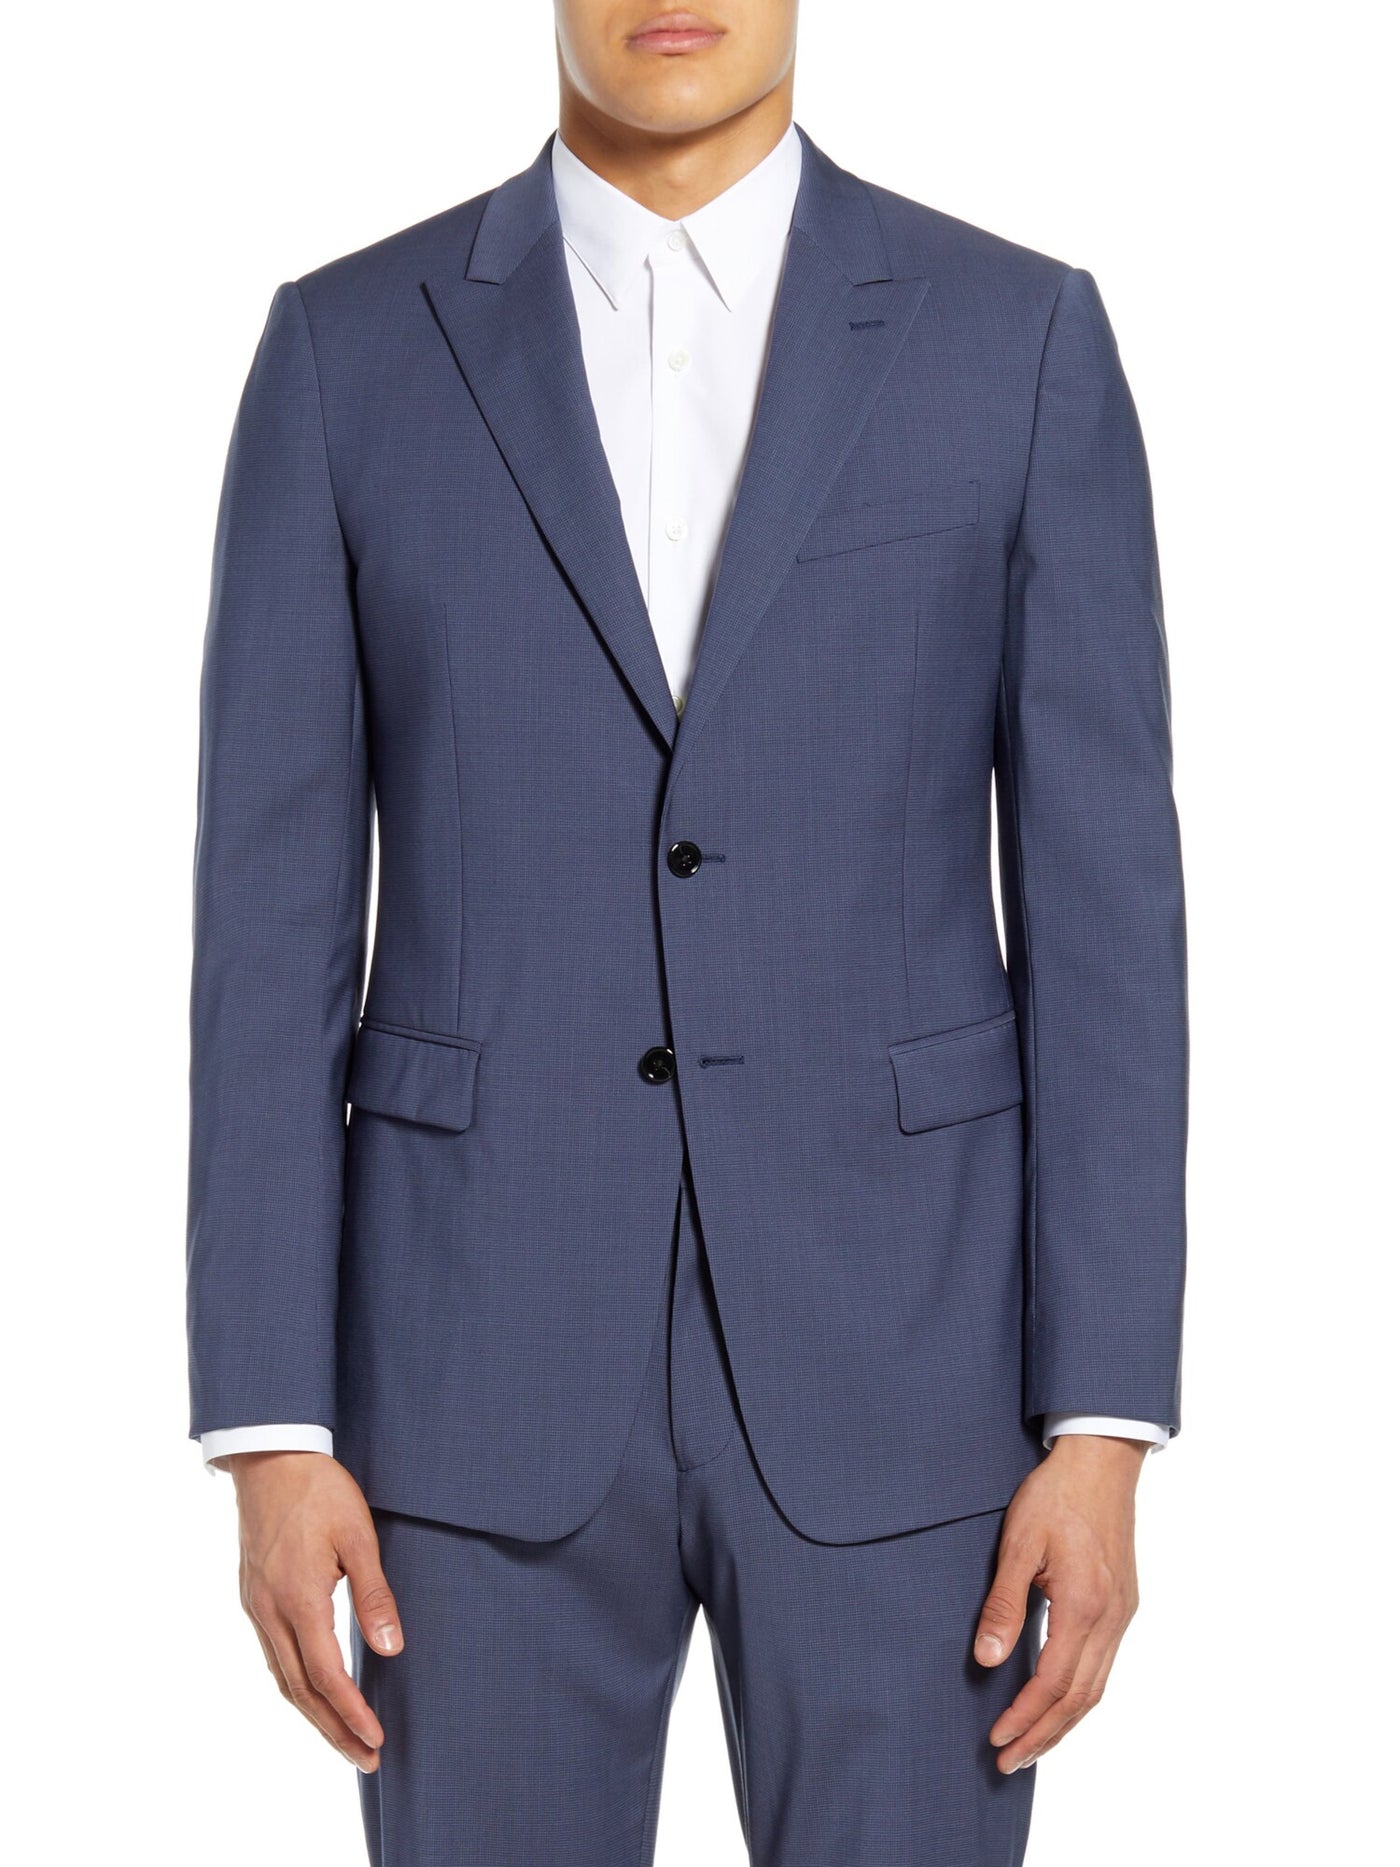 THEORY Mens Chambers Blue Single Breasted, Slim Fit Suit Separate Blazer Jacket 42L